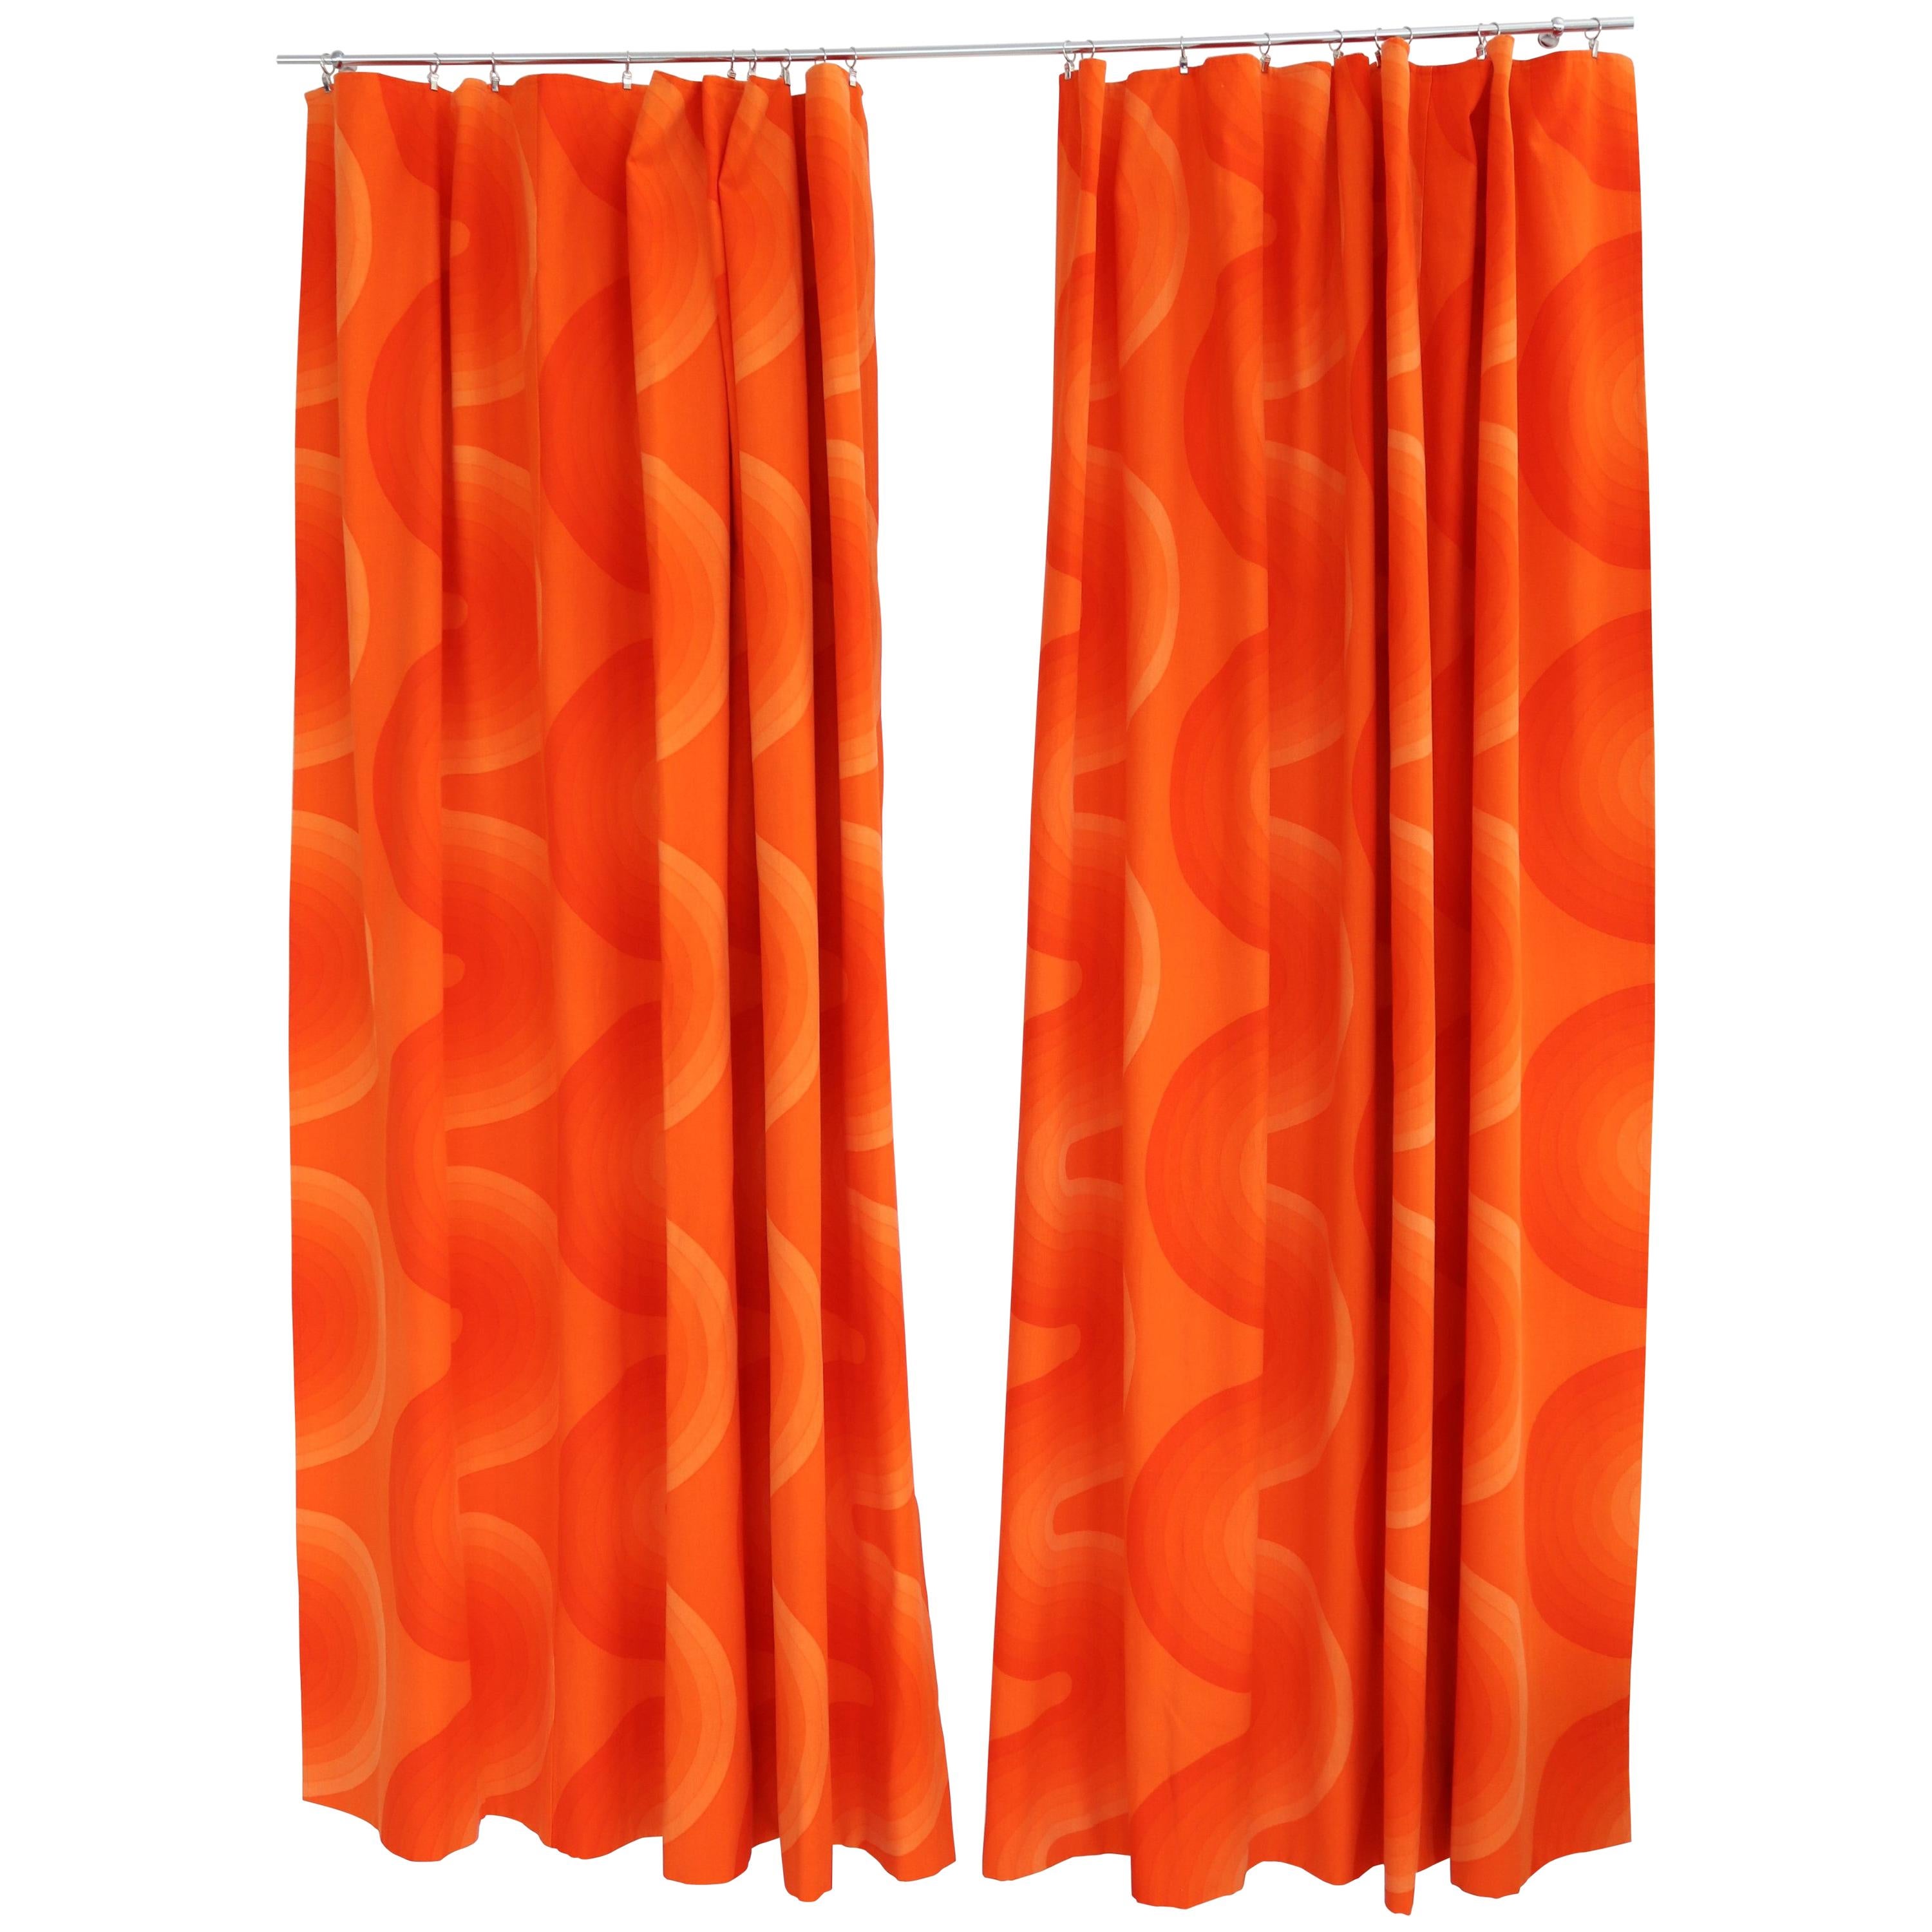 Verner Panton Set of Two Curtain Panels Tapestry Mira-X Collection, 1960